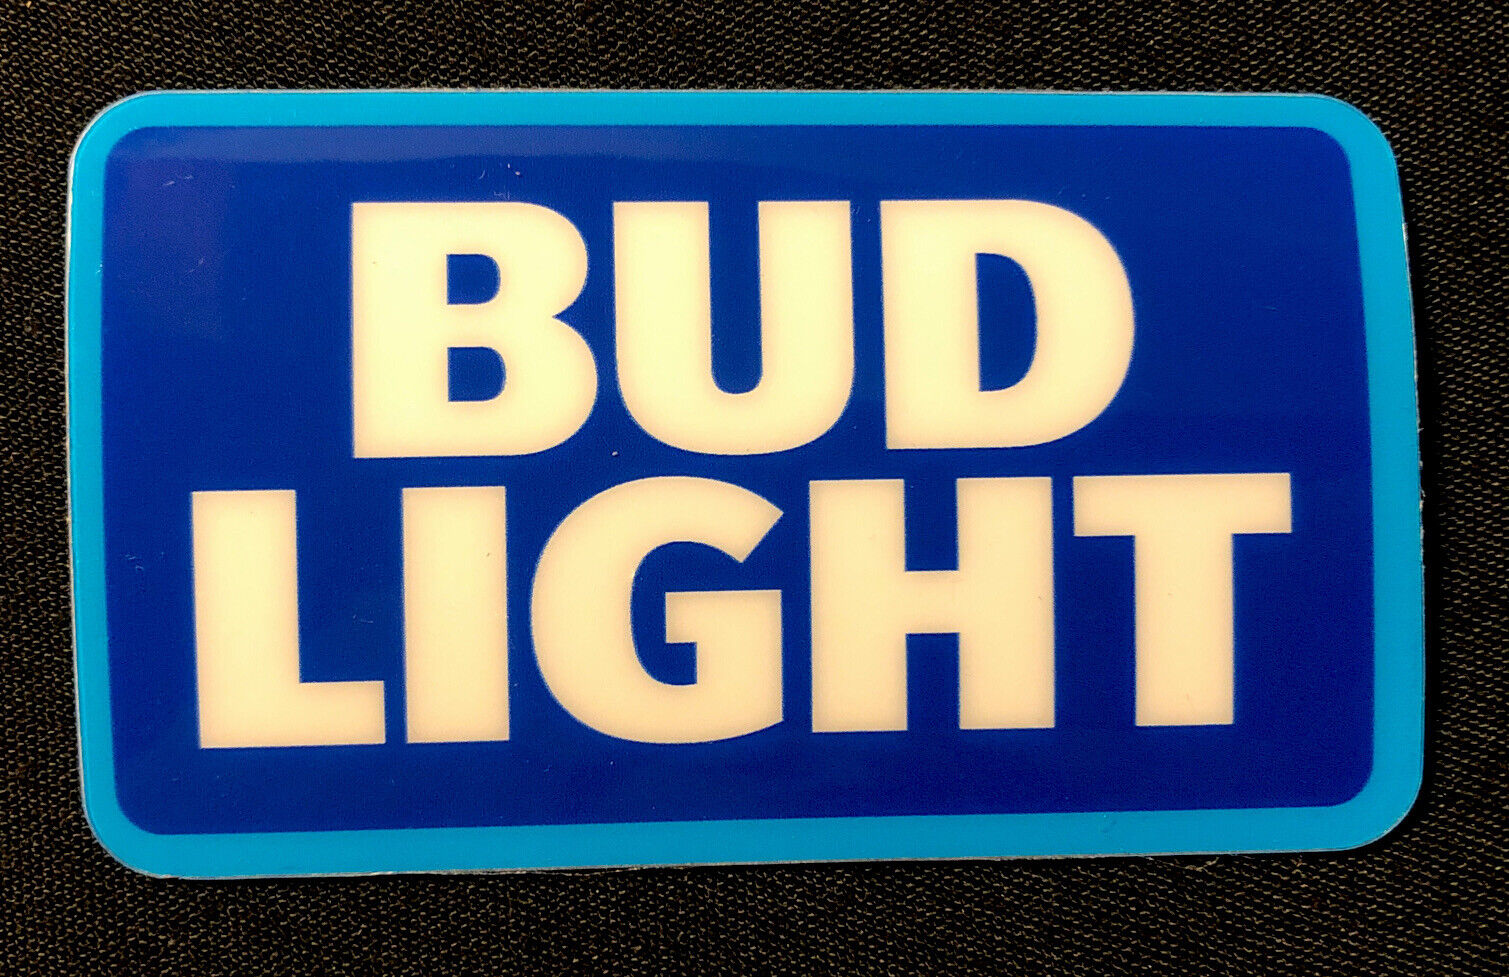 BUD LIGHT STICKER “A COLD ONE”  3 3/8 x 2”￼ VERY THICK & GLOSSY